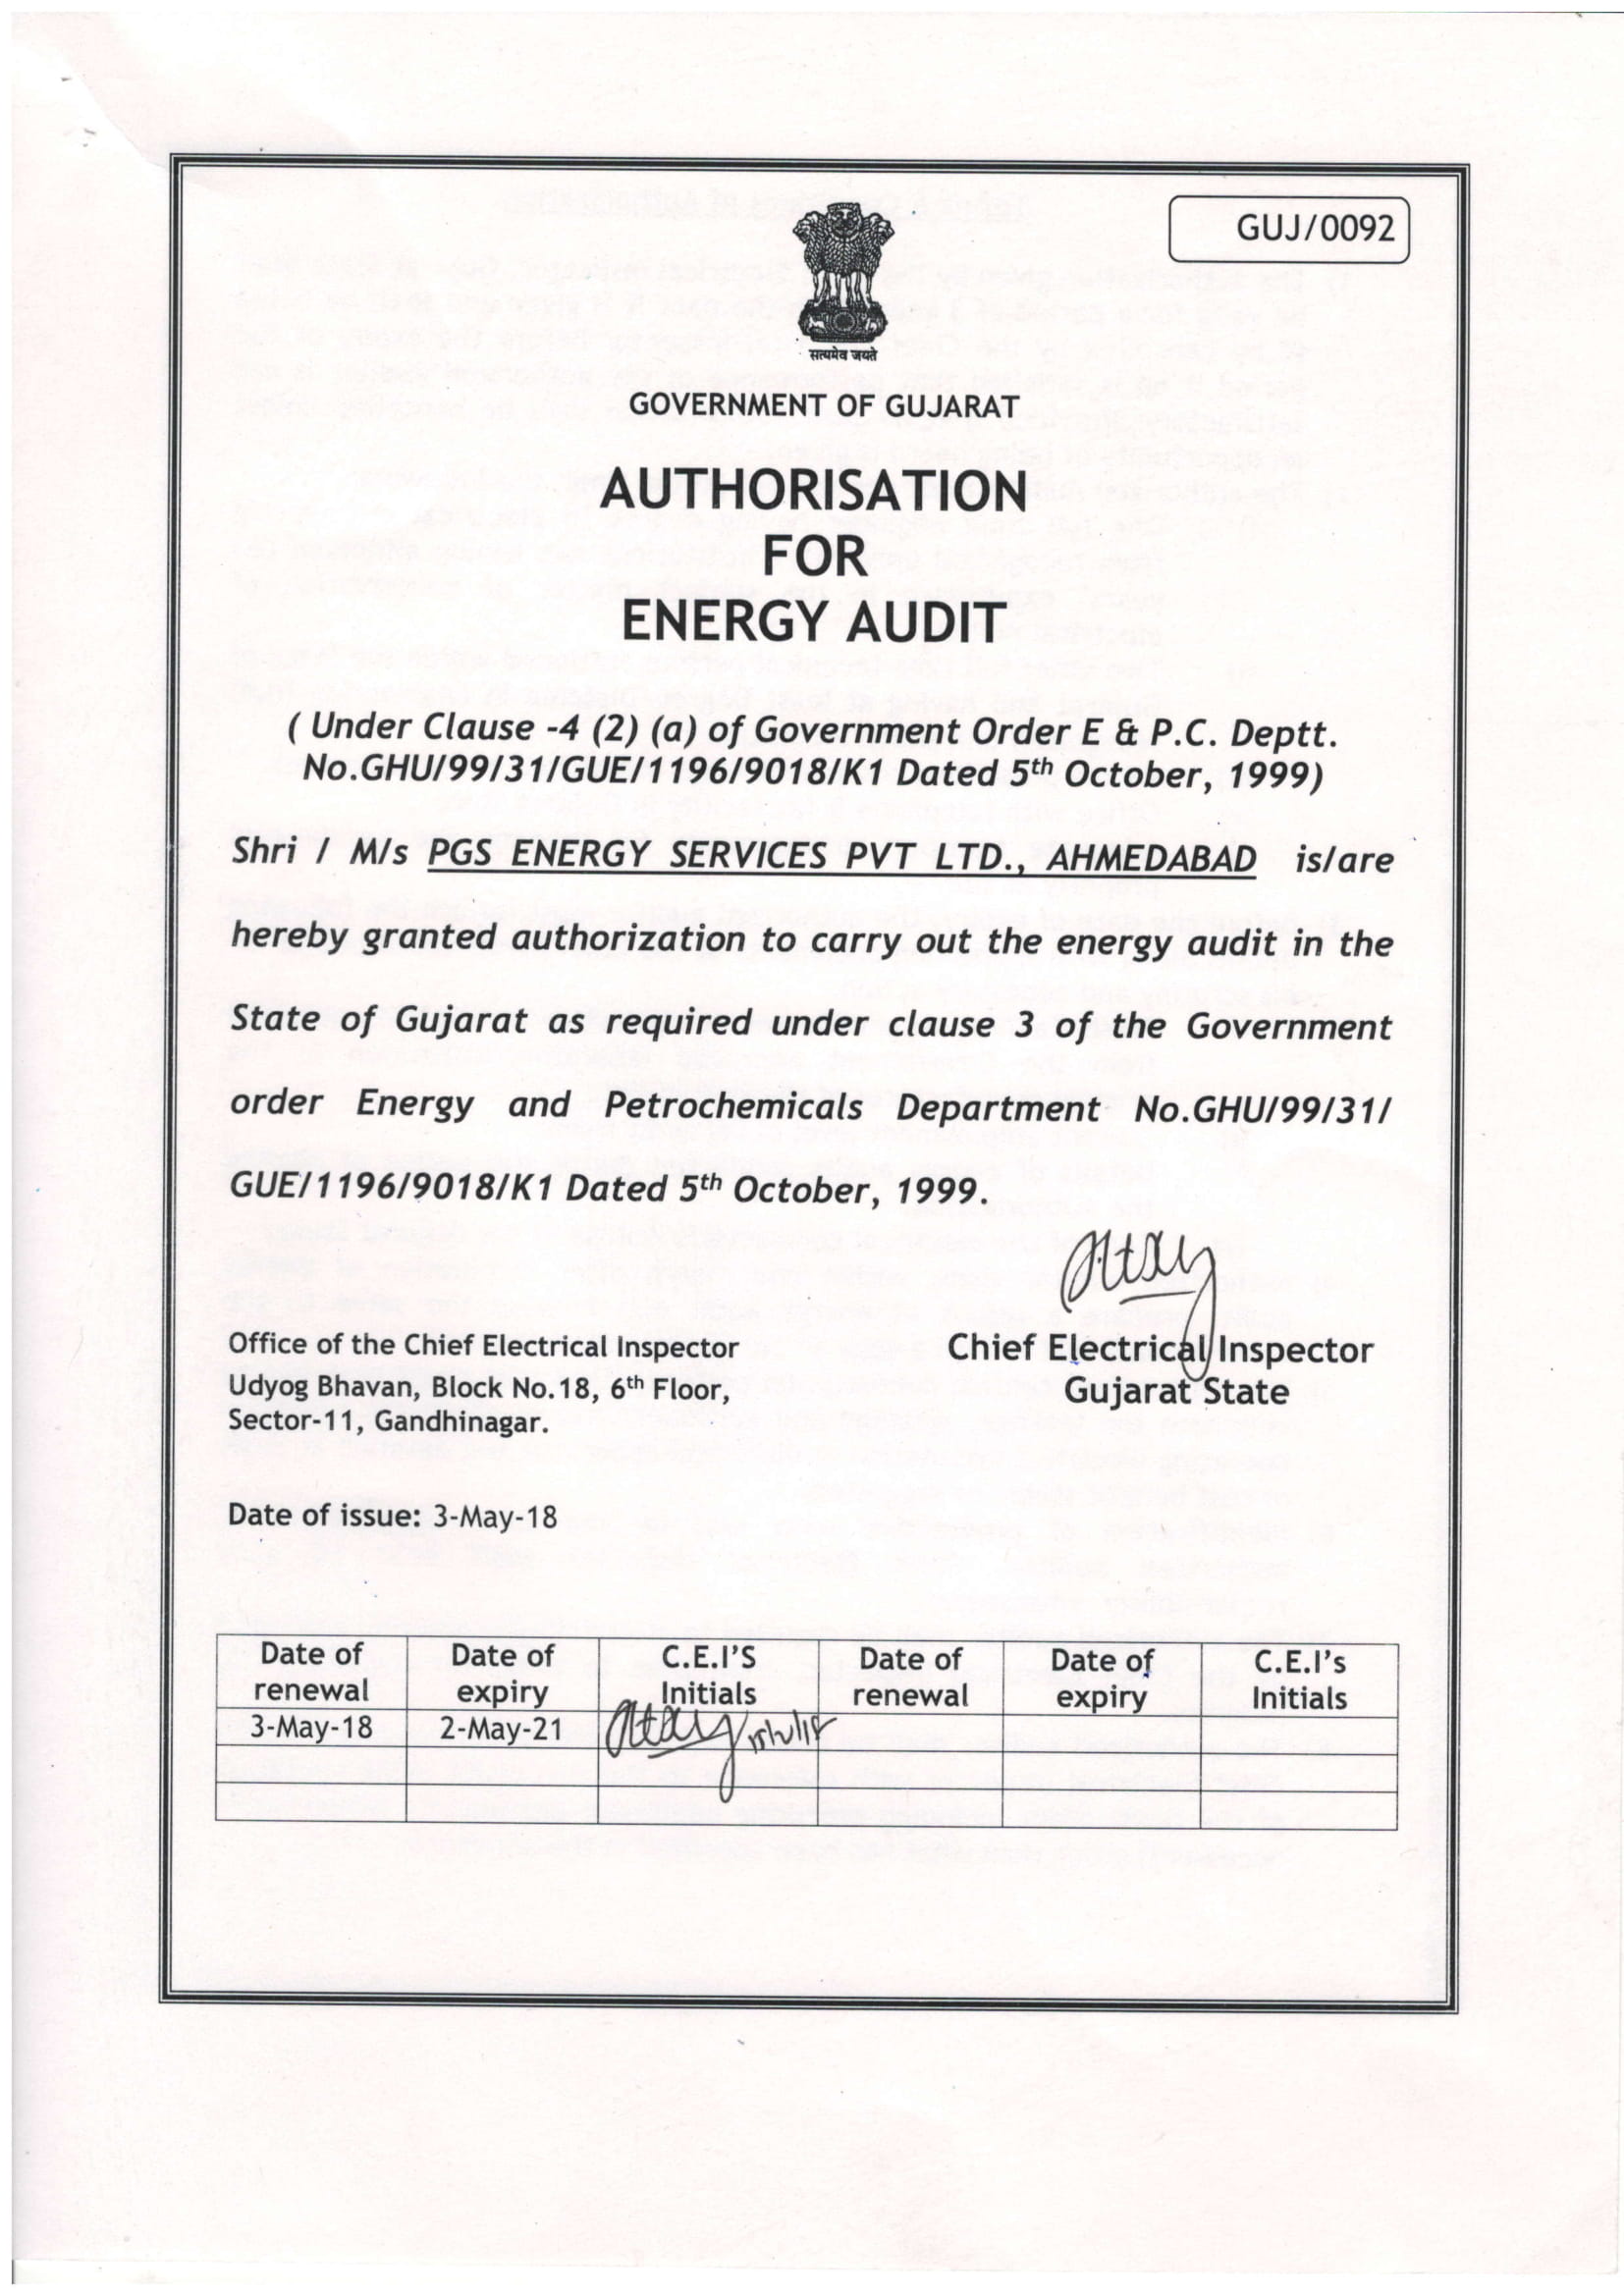 Certified Energy Auditors Pgs Energy Services Pvt Ltd